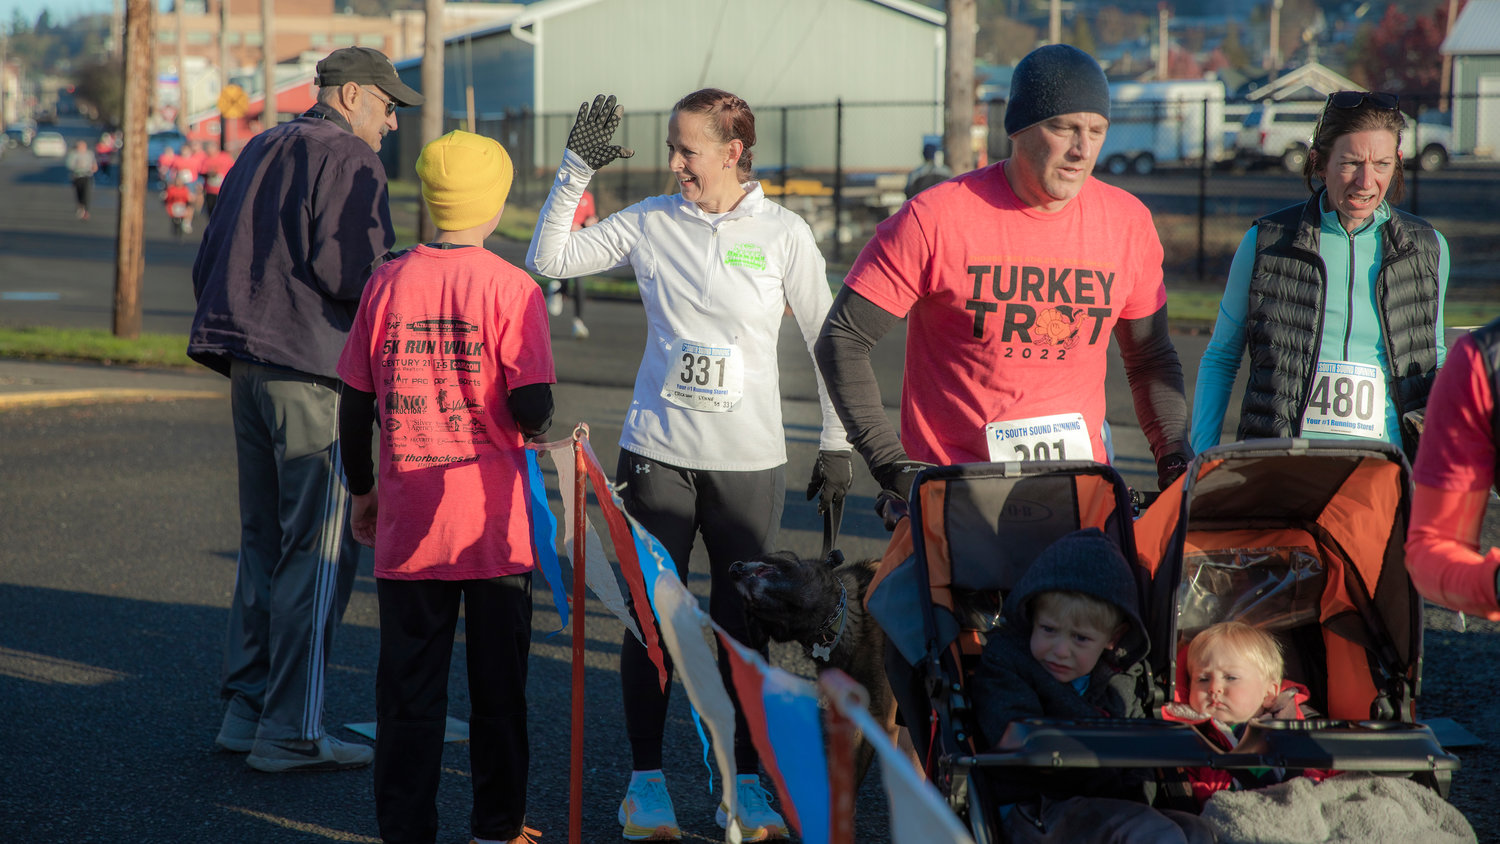 Participants smile and prepare to high-five as they make their way to the finish line during the Turkey Trot 5K Thanksgiving morning outside Thorbeckes in Chehalis.